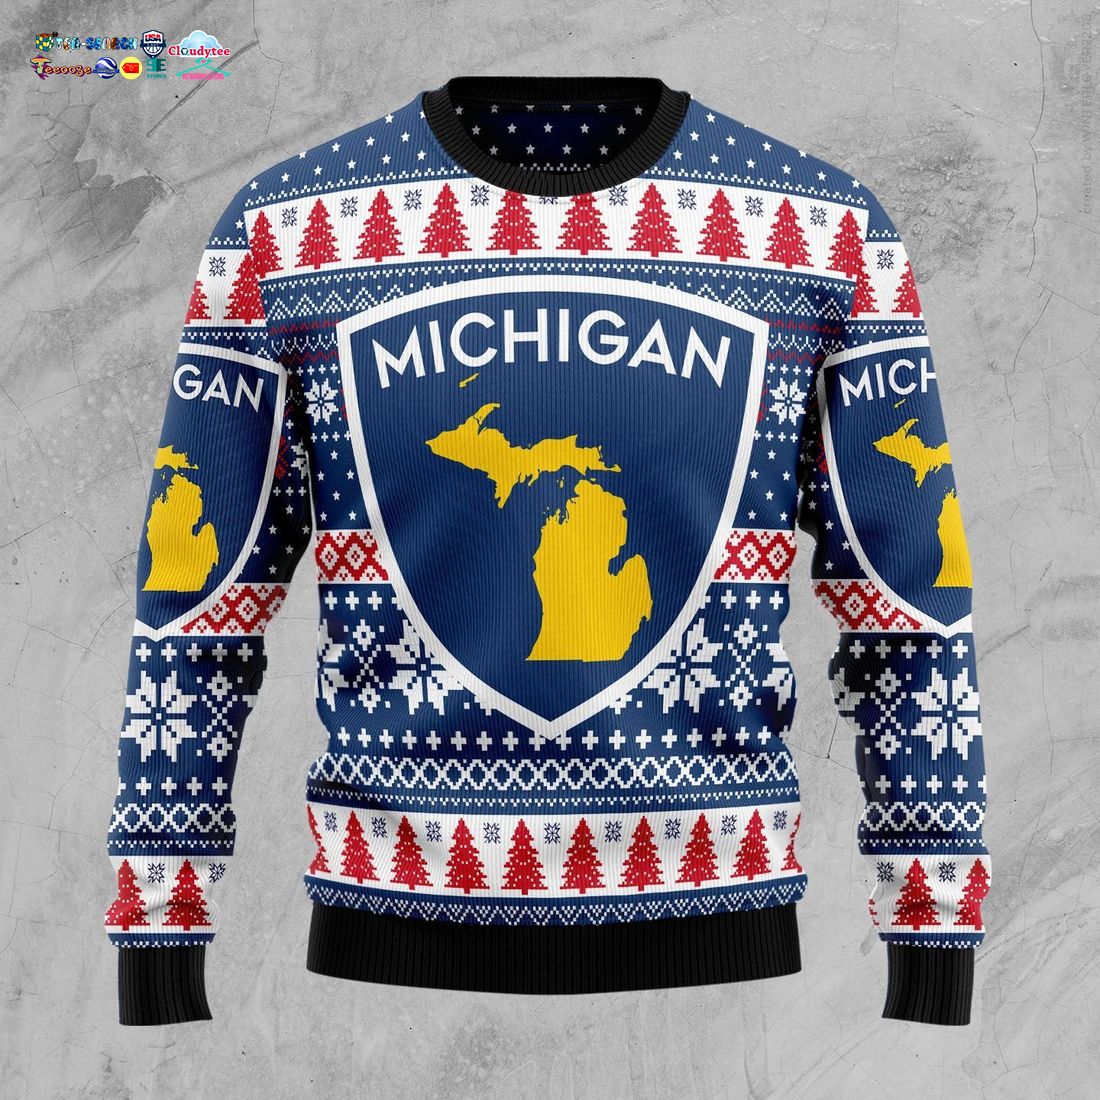 Michigan State Ugly Christmas Sweater - Coolosm